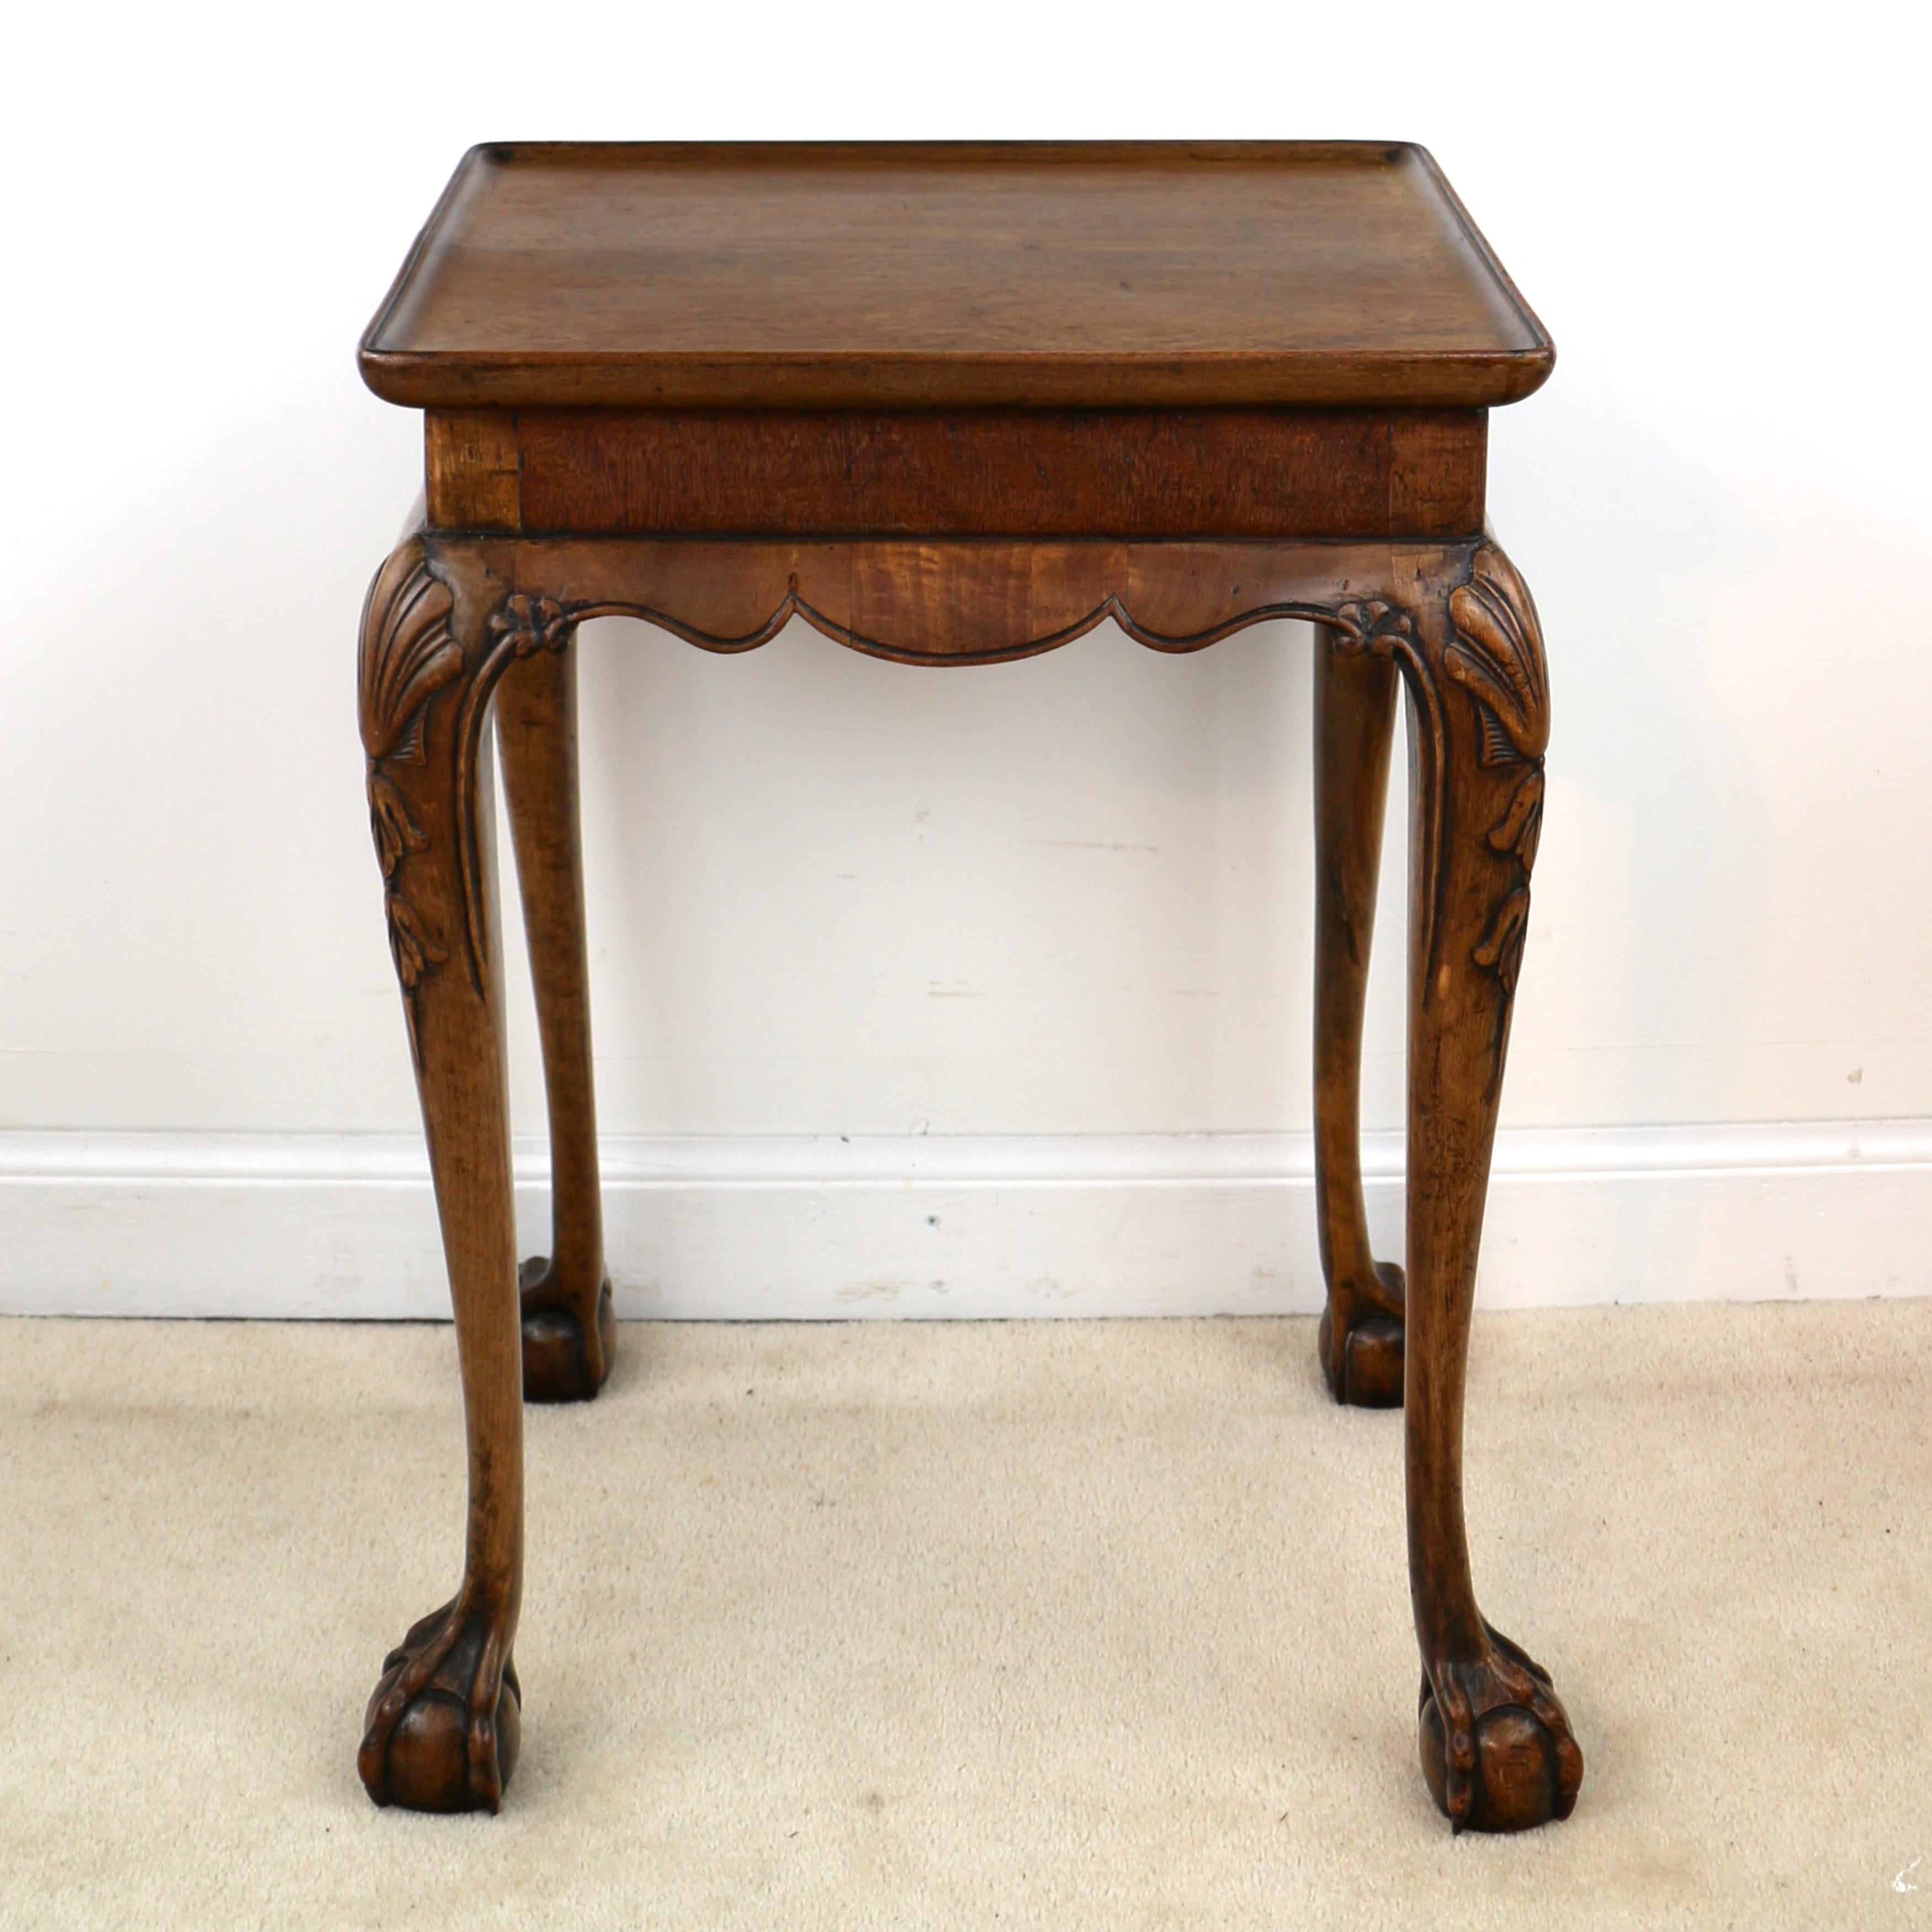 A rare Georgian Irish Chippendale small silver table or kettlestand in solid walnut, the rectangular top with a carved dished edge above a straight sided frieze and out-curved carved shaped apron and standing on elegant shell carved legs with webbed